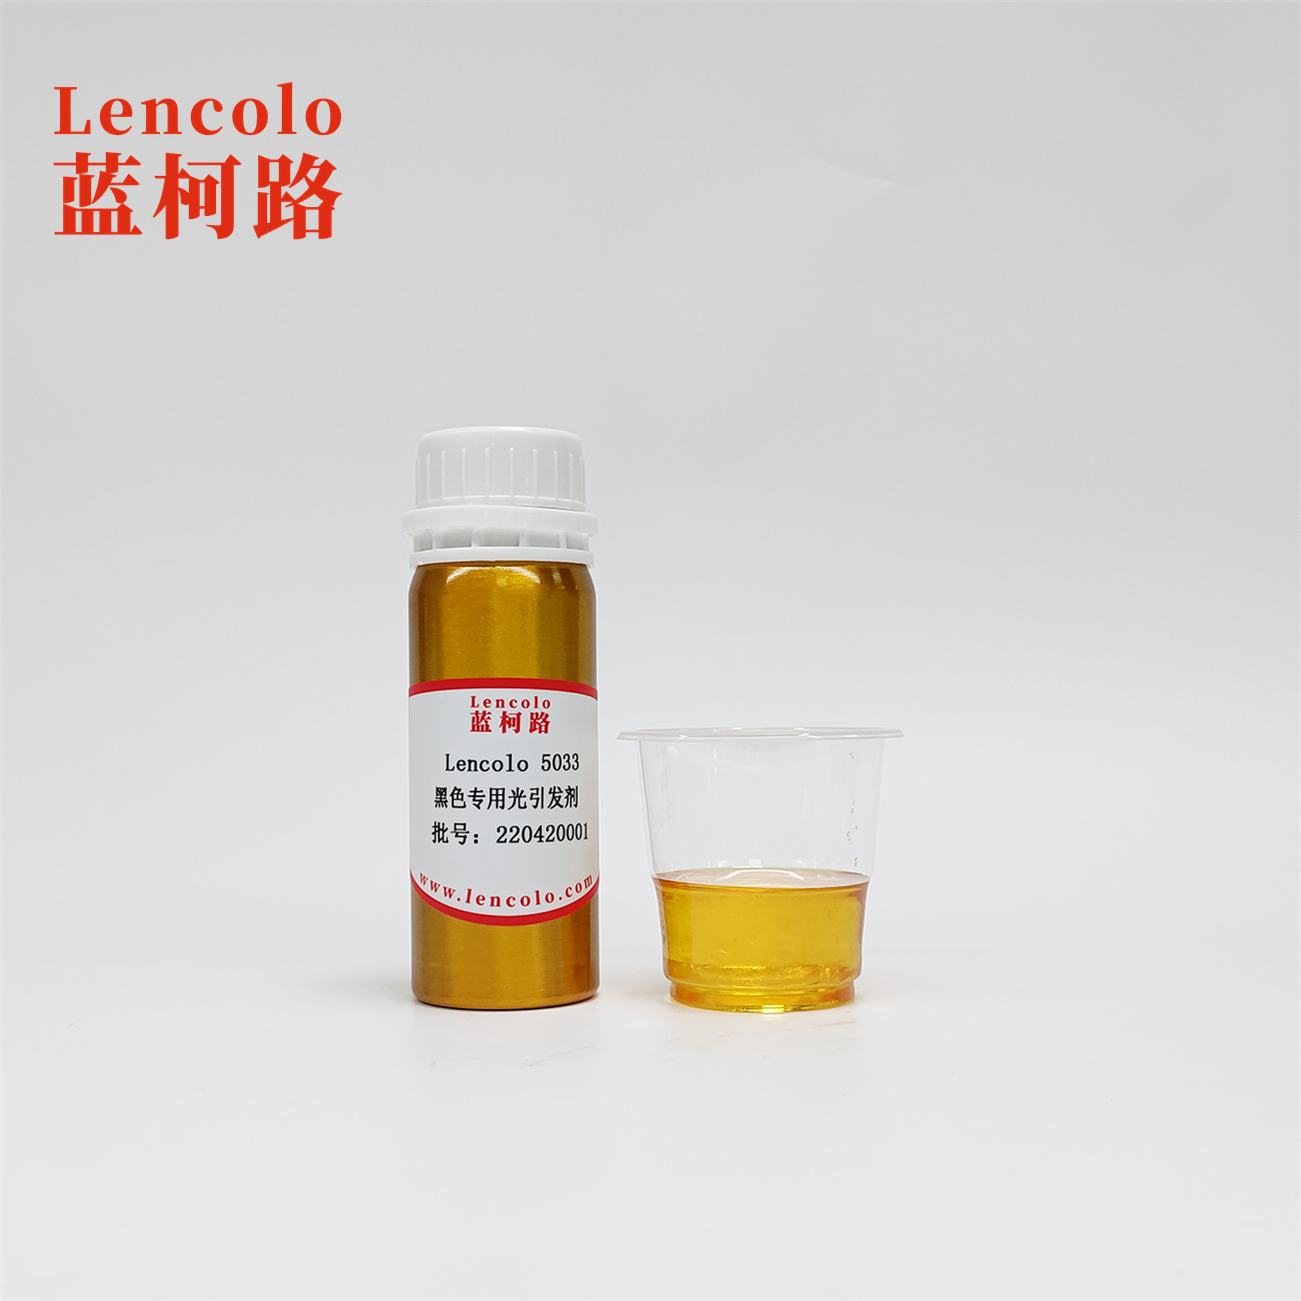 Lencolo 5033  Special Photoinitiator strong absorption peak for Black colored uv curing systems